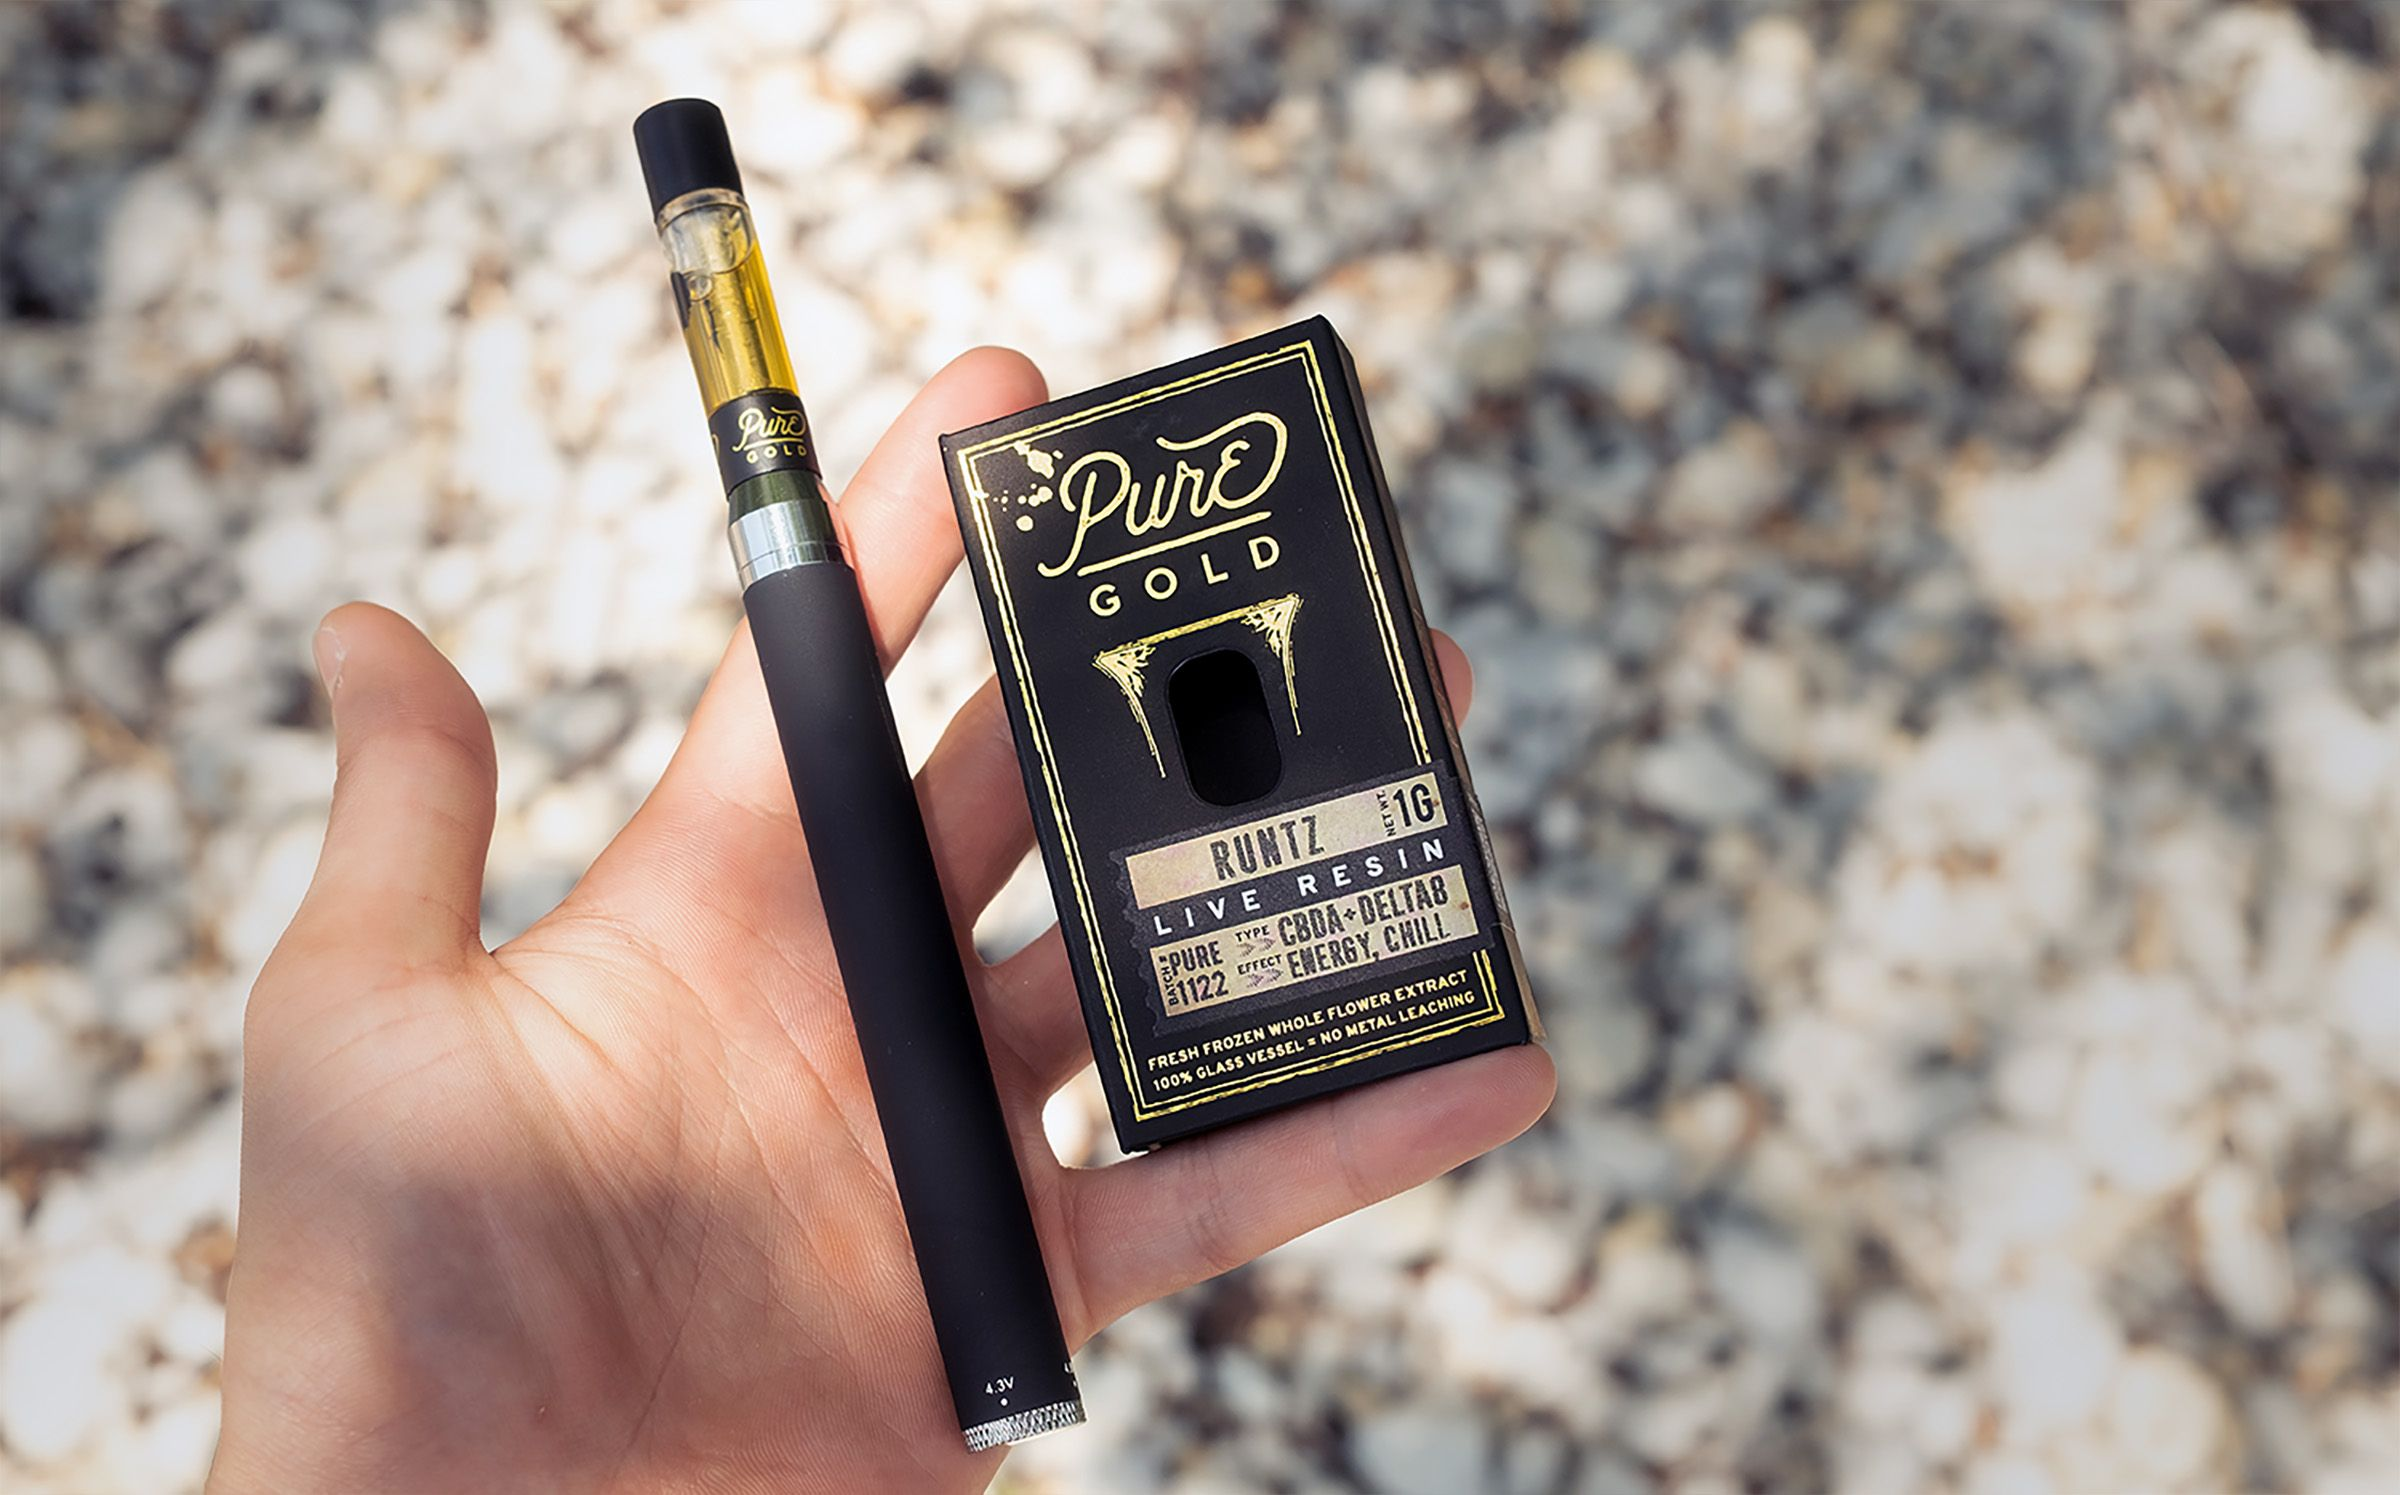 Primary Jane Vape Carts and Packaging